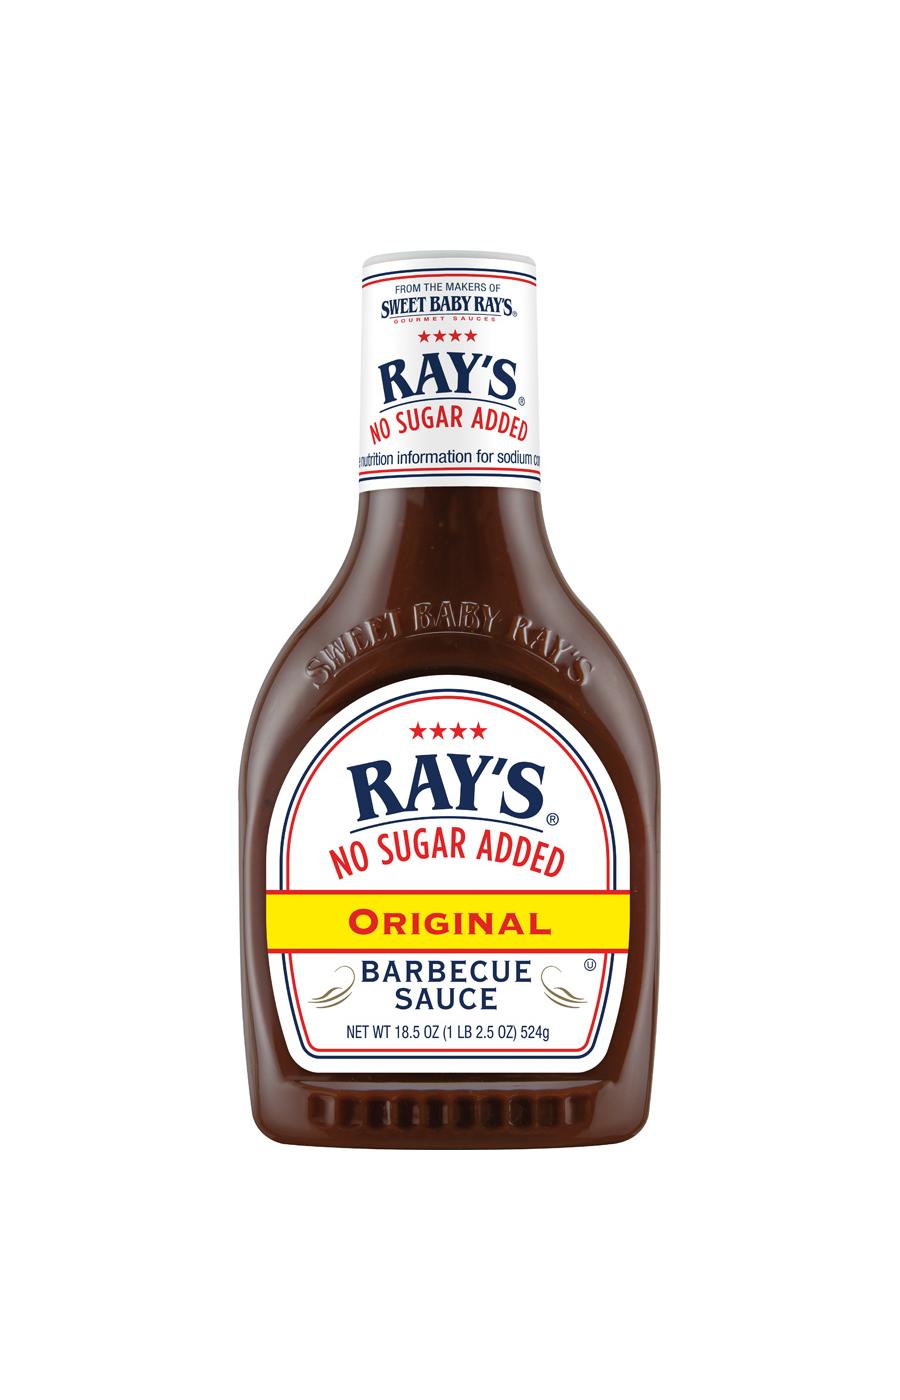 Sweet Baby Ray's No Sugar Added Original Barbecue Sauce; image 1 of 3